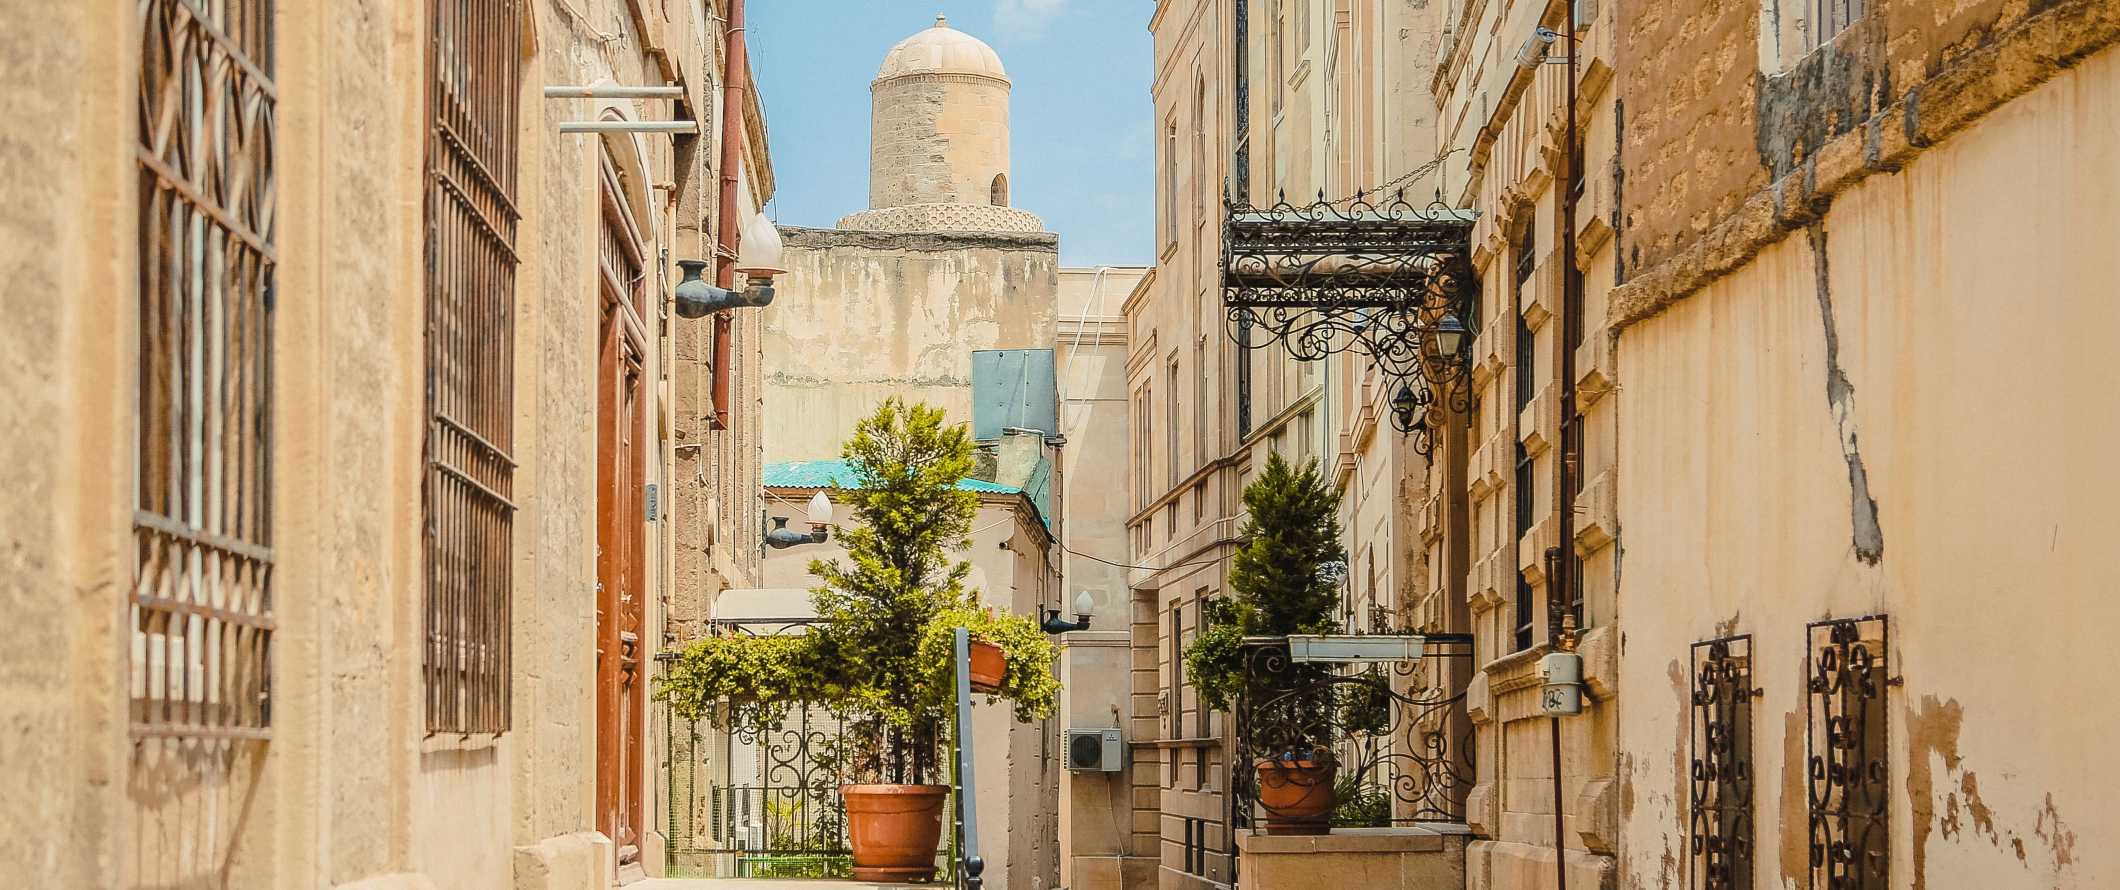 Streetscape with historic beige buildings and a domed tower in the background on a bright sunny day in Baku, Azerbaijan